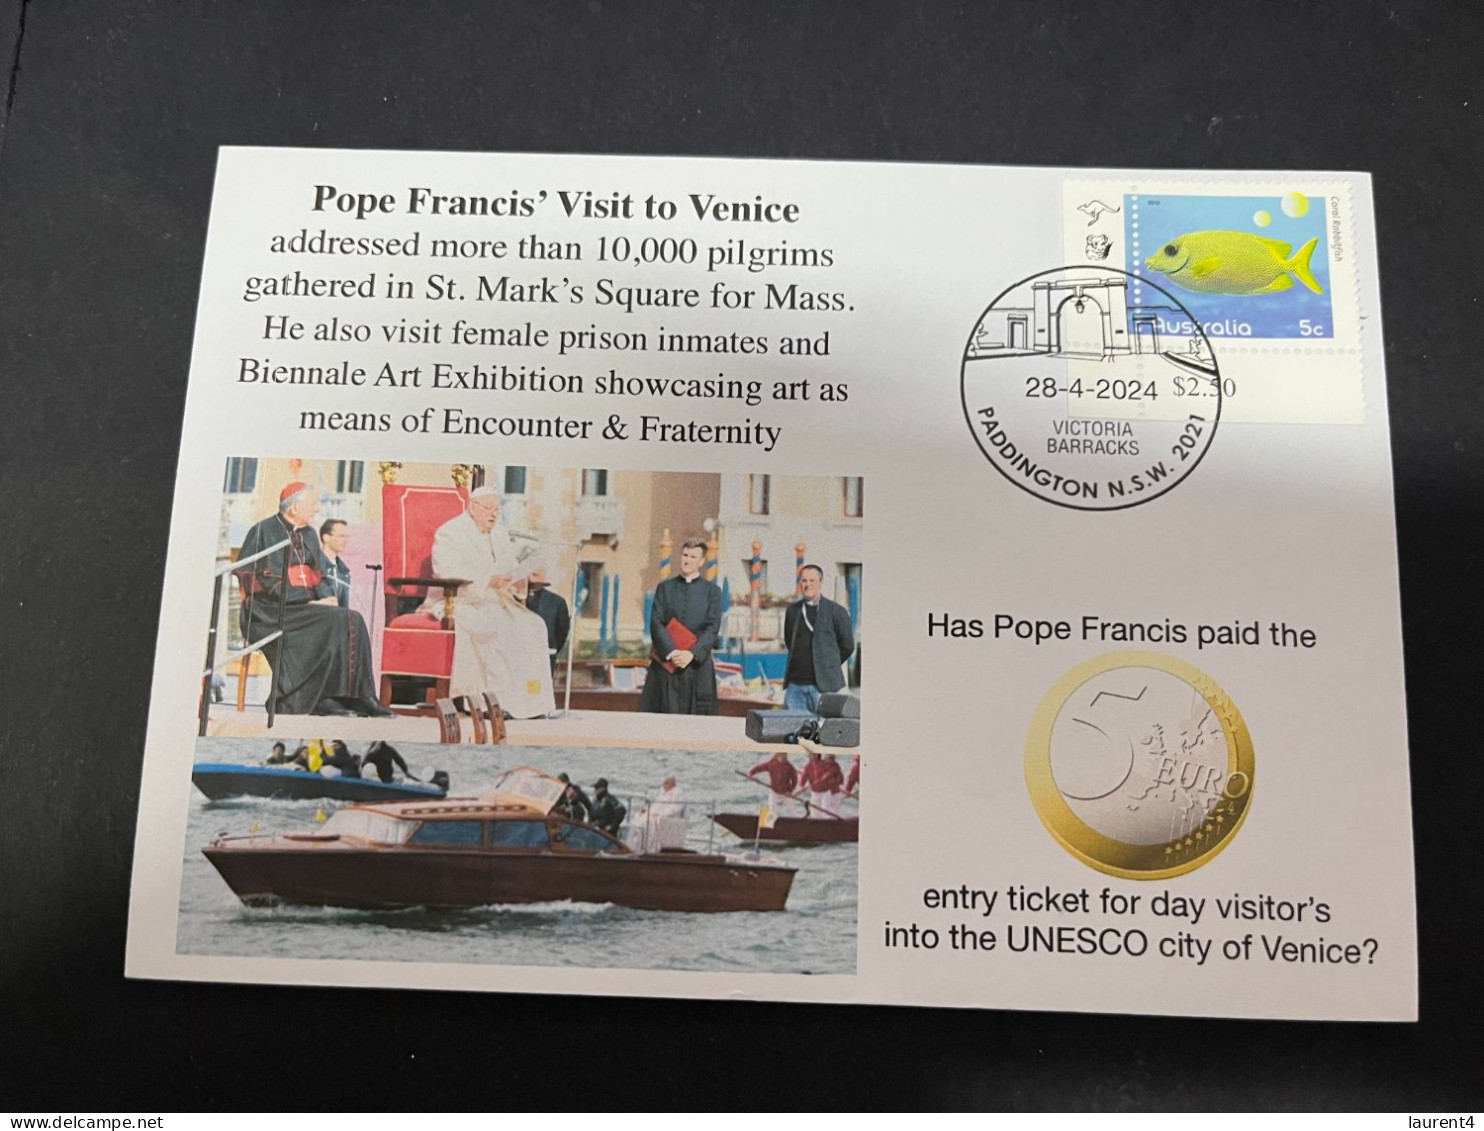 30-4-2024 (3 Z 26) Pope Francis Visit To Venice In Italy (28-4-2024) OZ Stamp (1 Cover) 5 Euro Visit Fee Paid ? - Christianisme